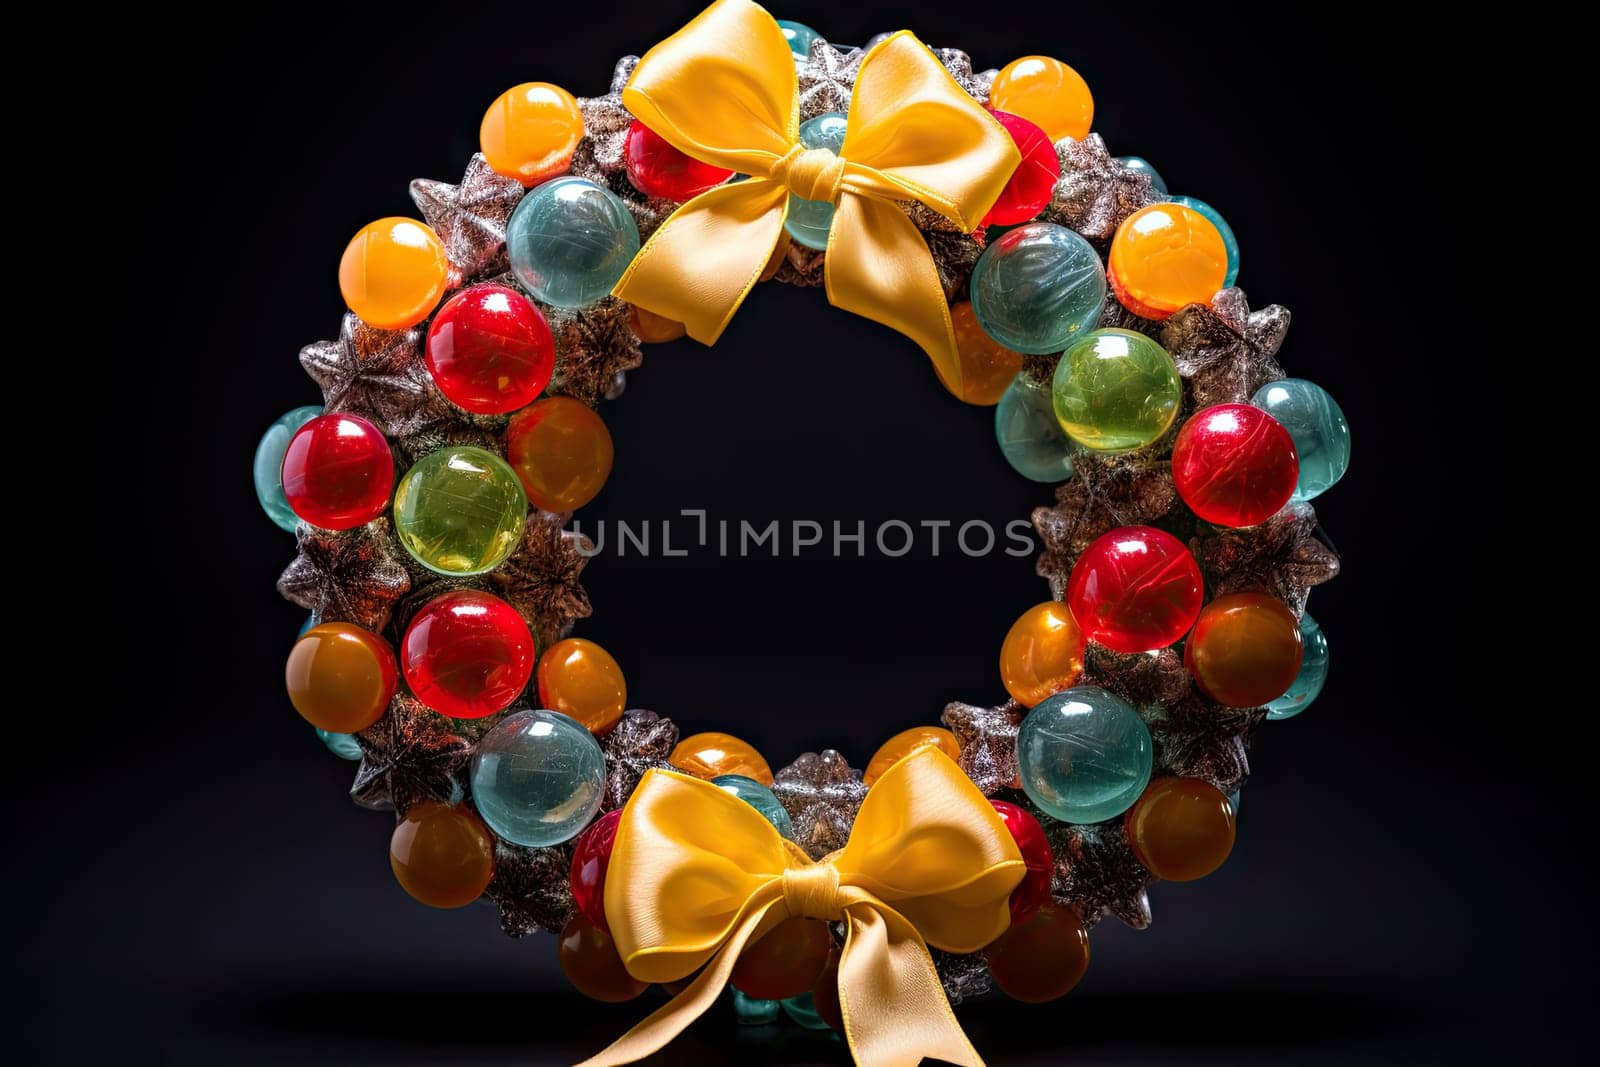 A Festive Christmas Wreath with a Bright Yellow Bow on a Dramatic Black Background Created With Generative AI Technology